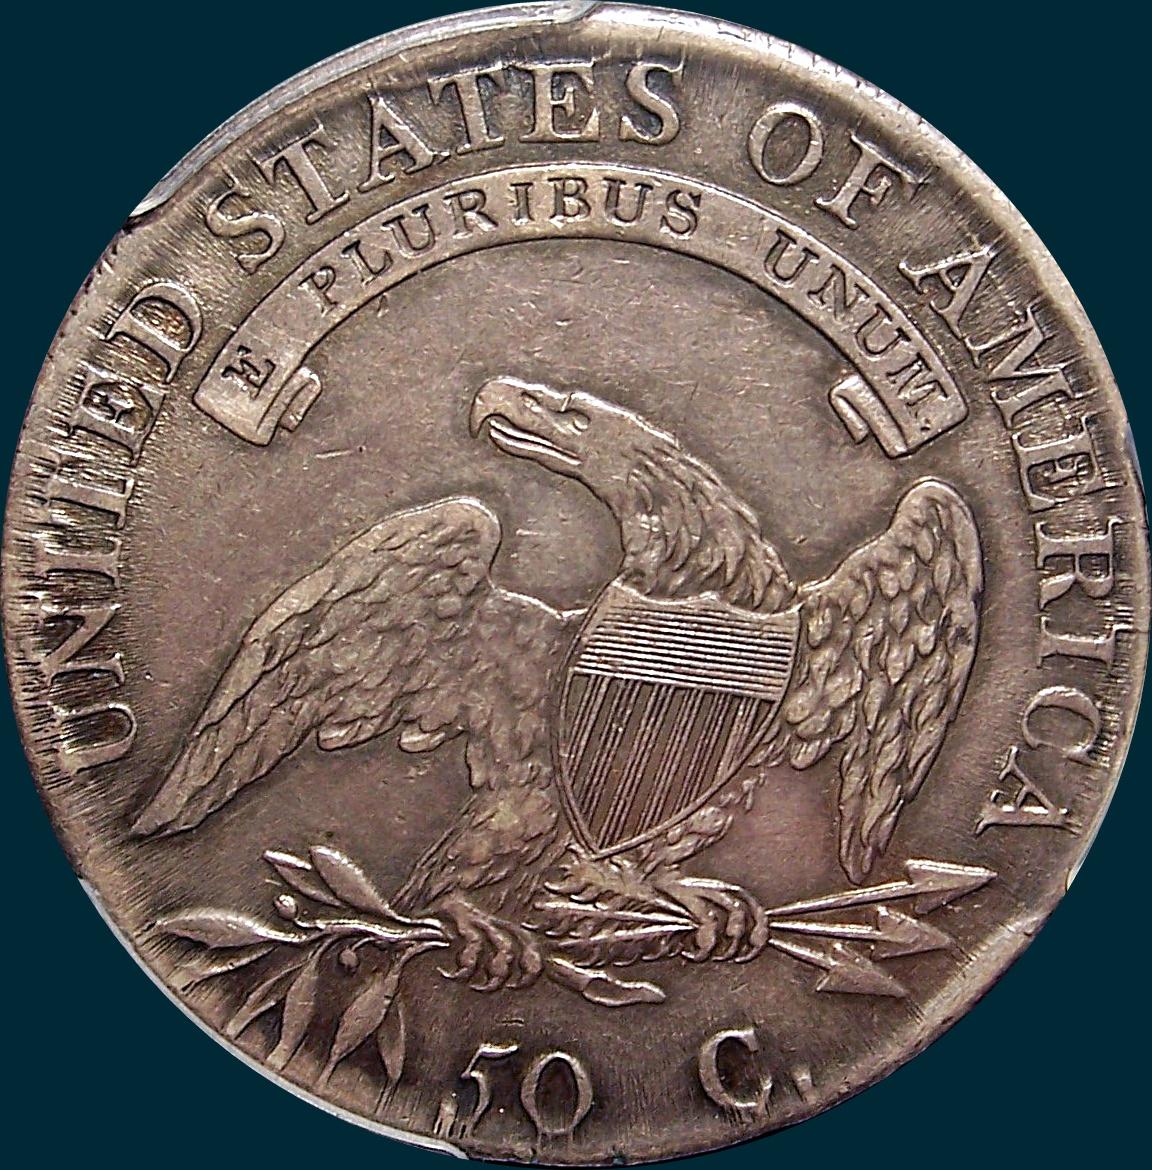 1808, 8 over 7, 8/7, Capped Bust, Half Dollar